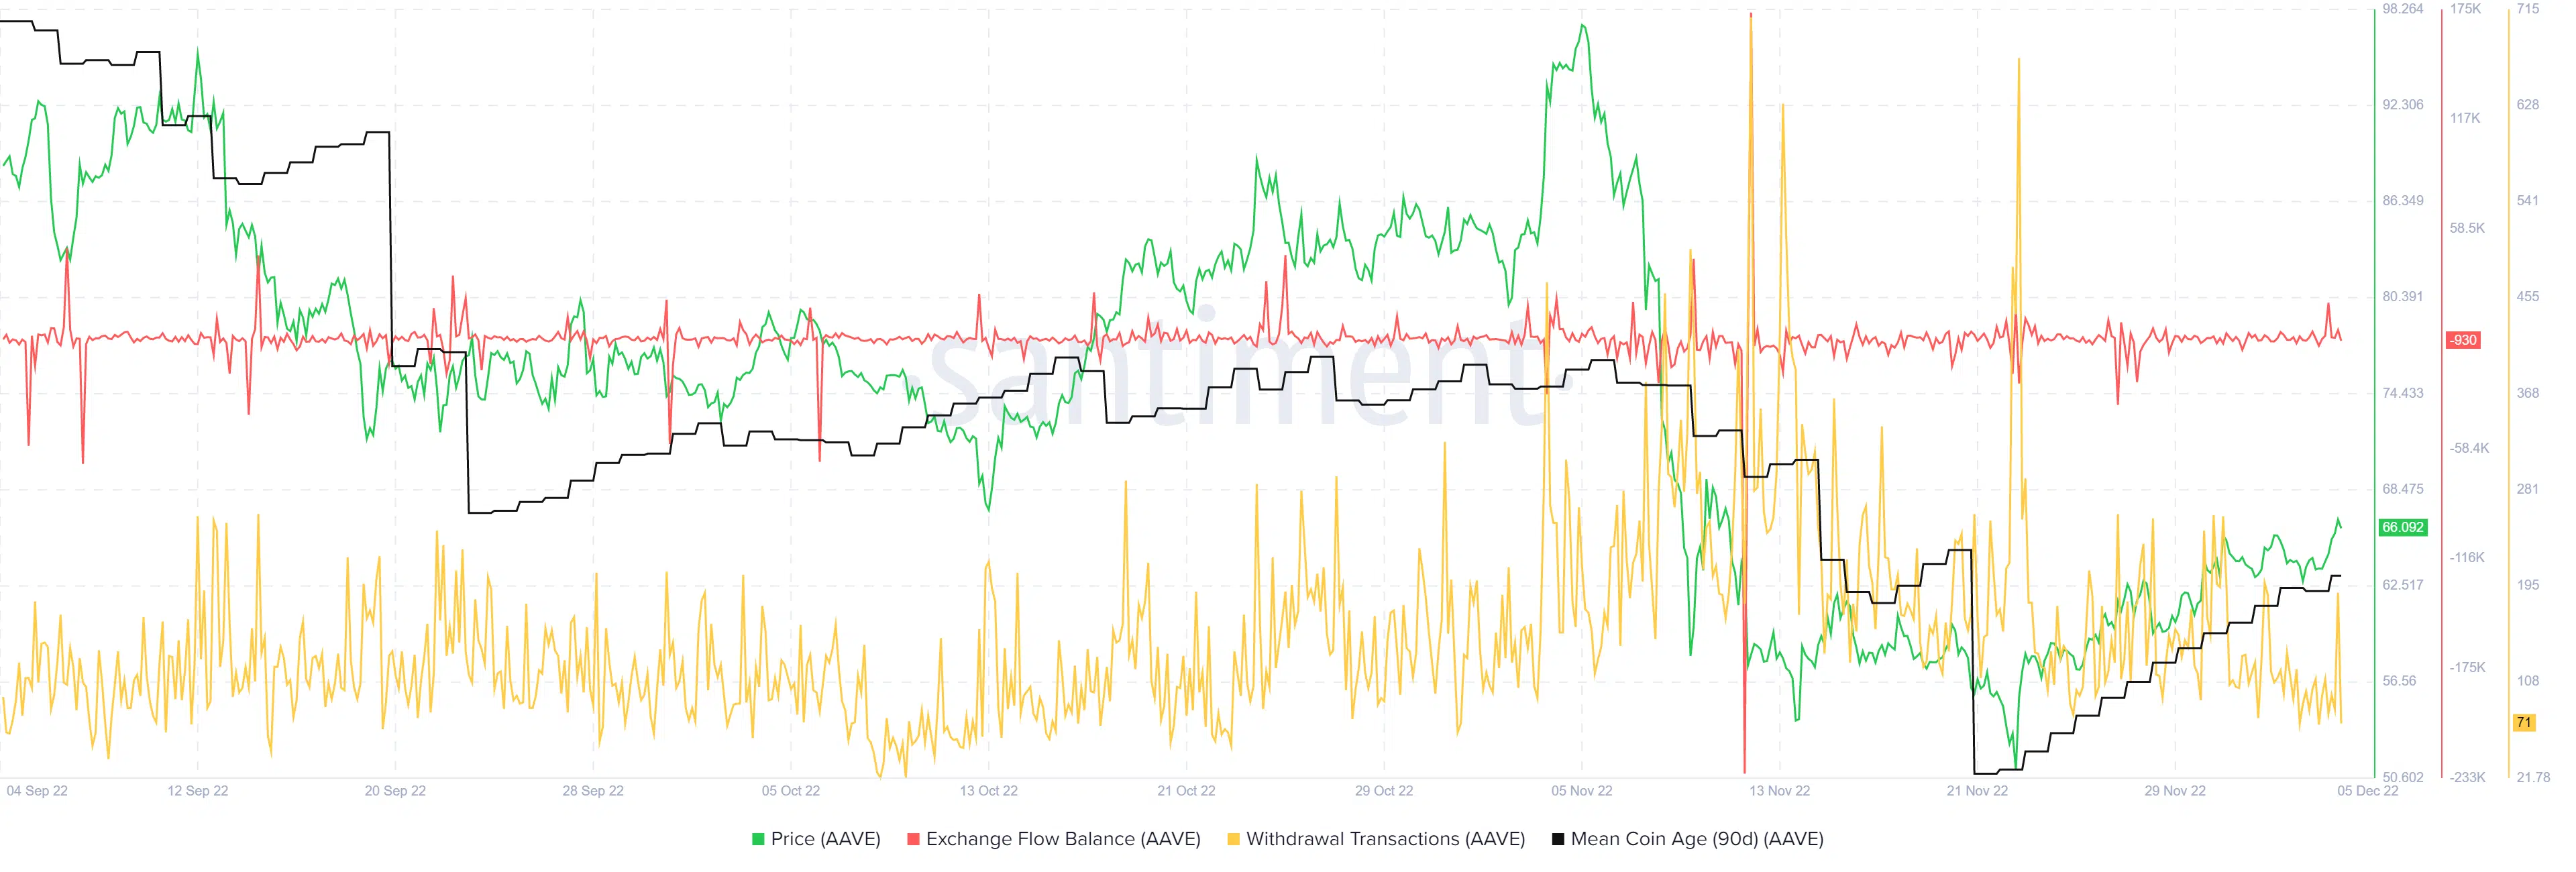 Aave has a higher timeframe bearish bias but the bulls have been assertive recently